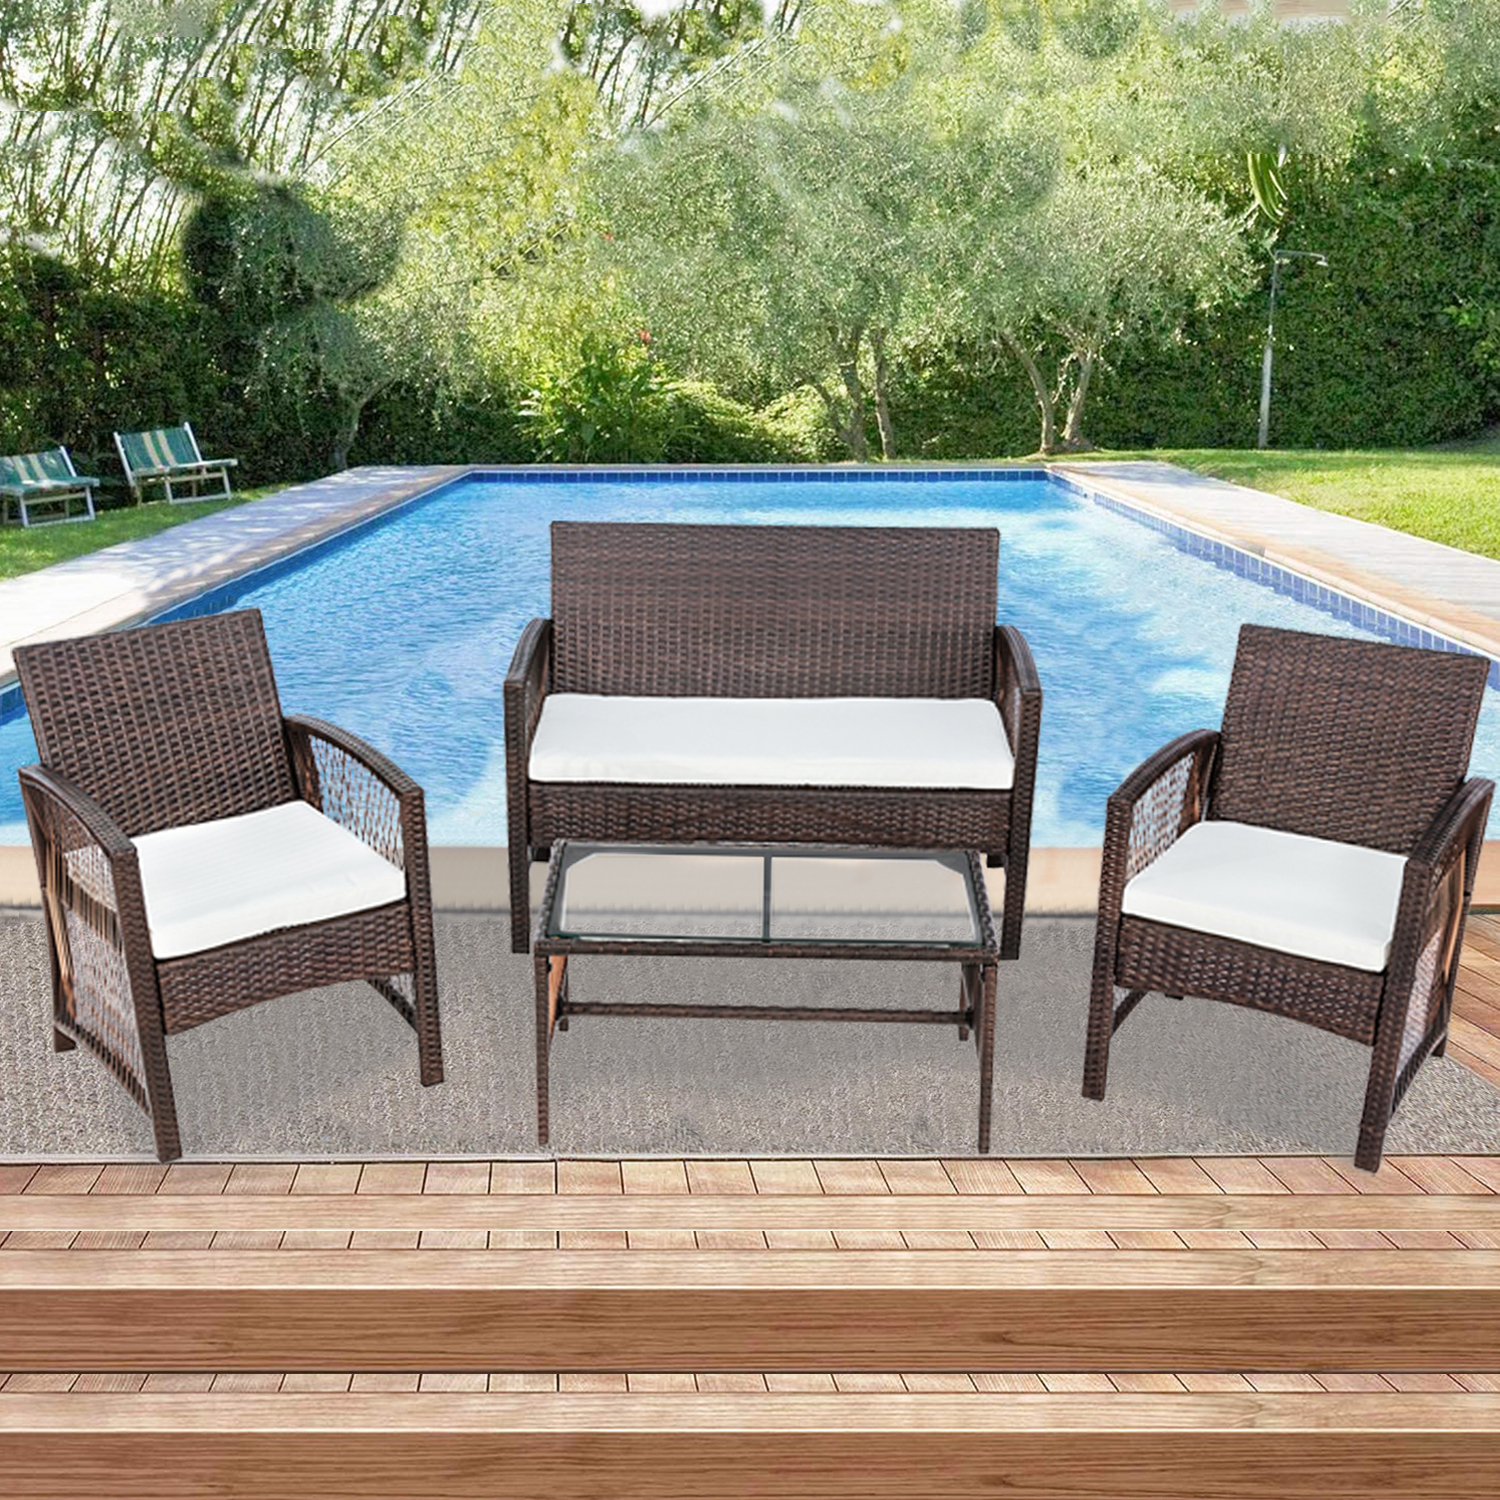 4 Piece Bistro Patio Set, Rattan Wicker Outdoor Patio Furniture Dining Sets, 2pcs Arm Chairs 1pc Love Seat&Coffee Table, Outdoor Conversation Sets for Backyard Poolside Garden, Brown, W7783 - image 3 of 11